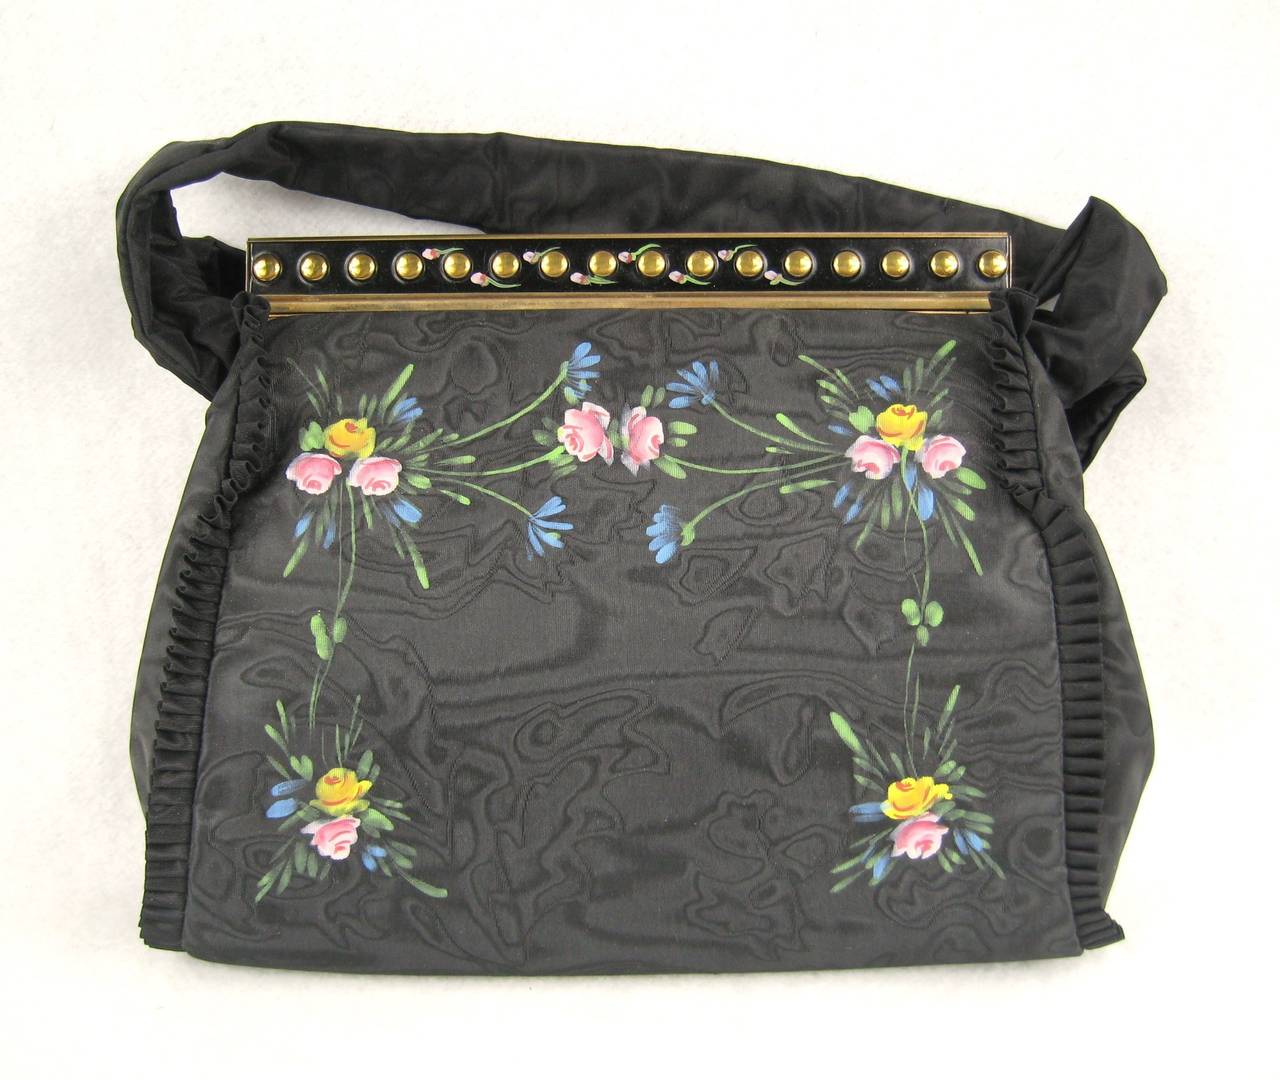 Stunning! In its original box this black floral hand-painted handbag is Stunning! It has all the items found in a handbag from this era still in it, wrapped up and never used. The bag measures 10 inches across bottom x 8 inches high. With strap, it